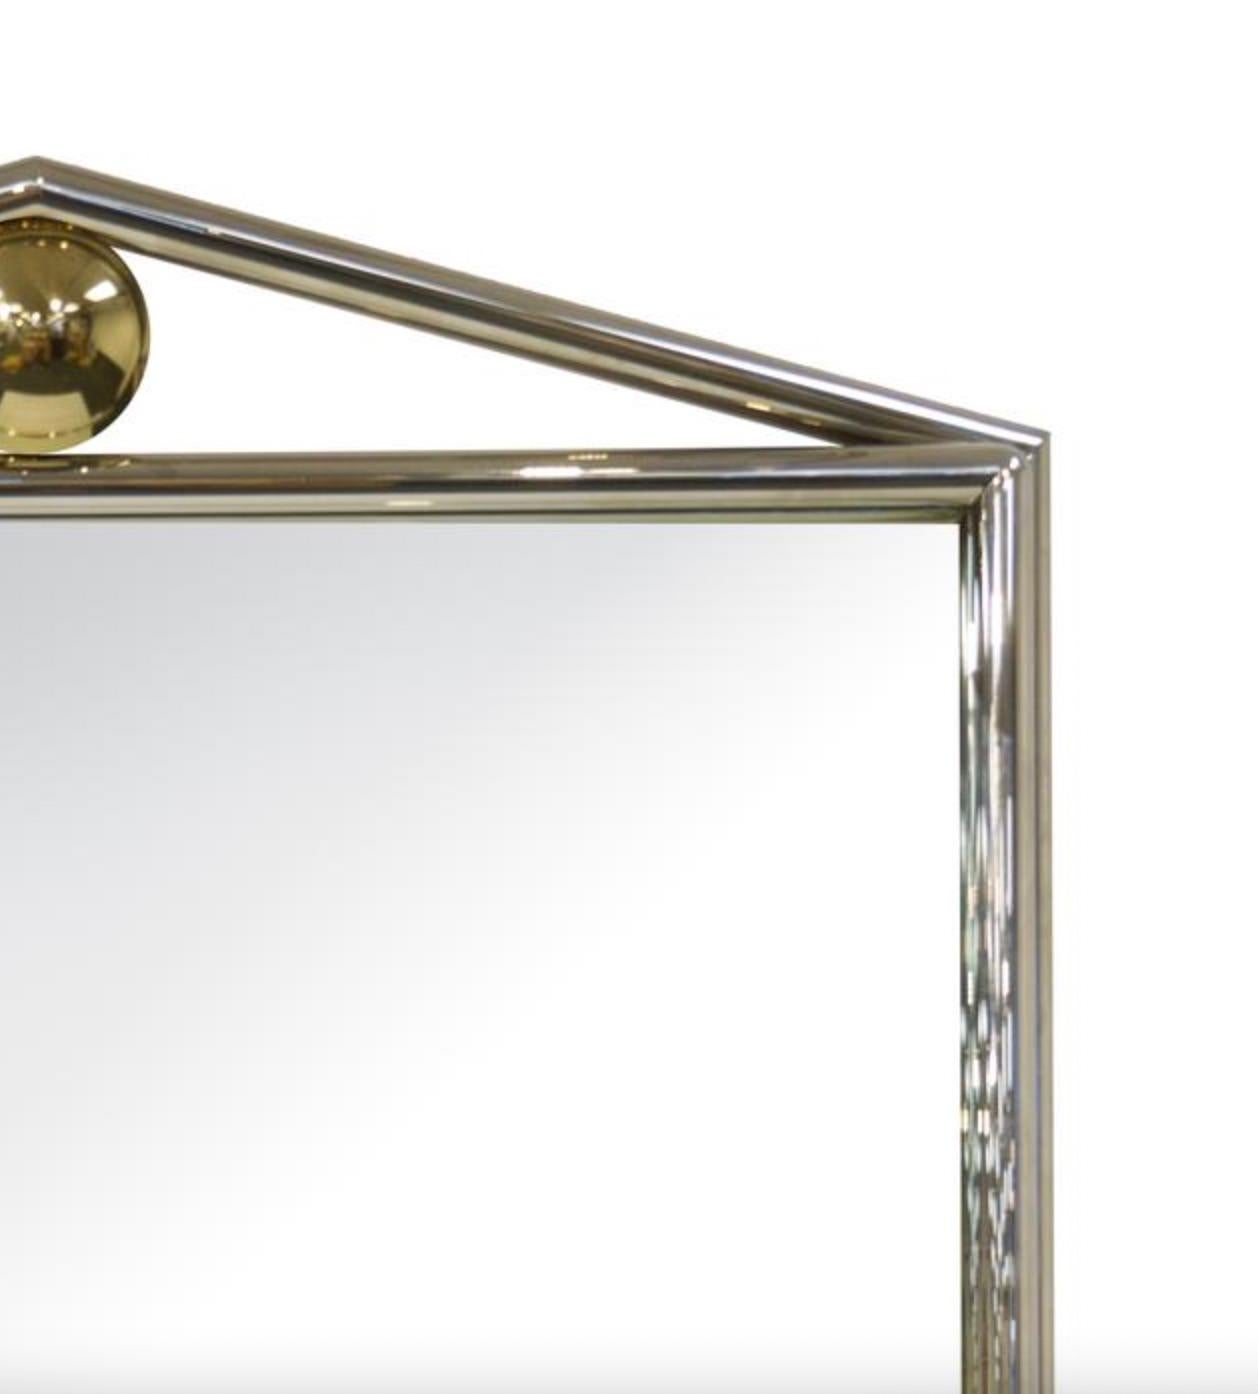 Mid-20th Century Exceptional Mid Century Modern Chrome Framed / Brass Decorated Mantel Mirror For Sale